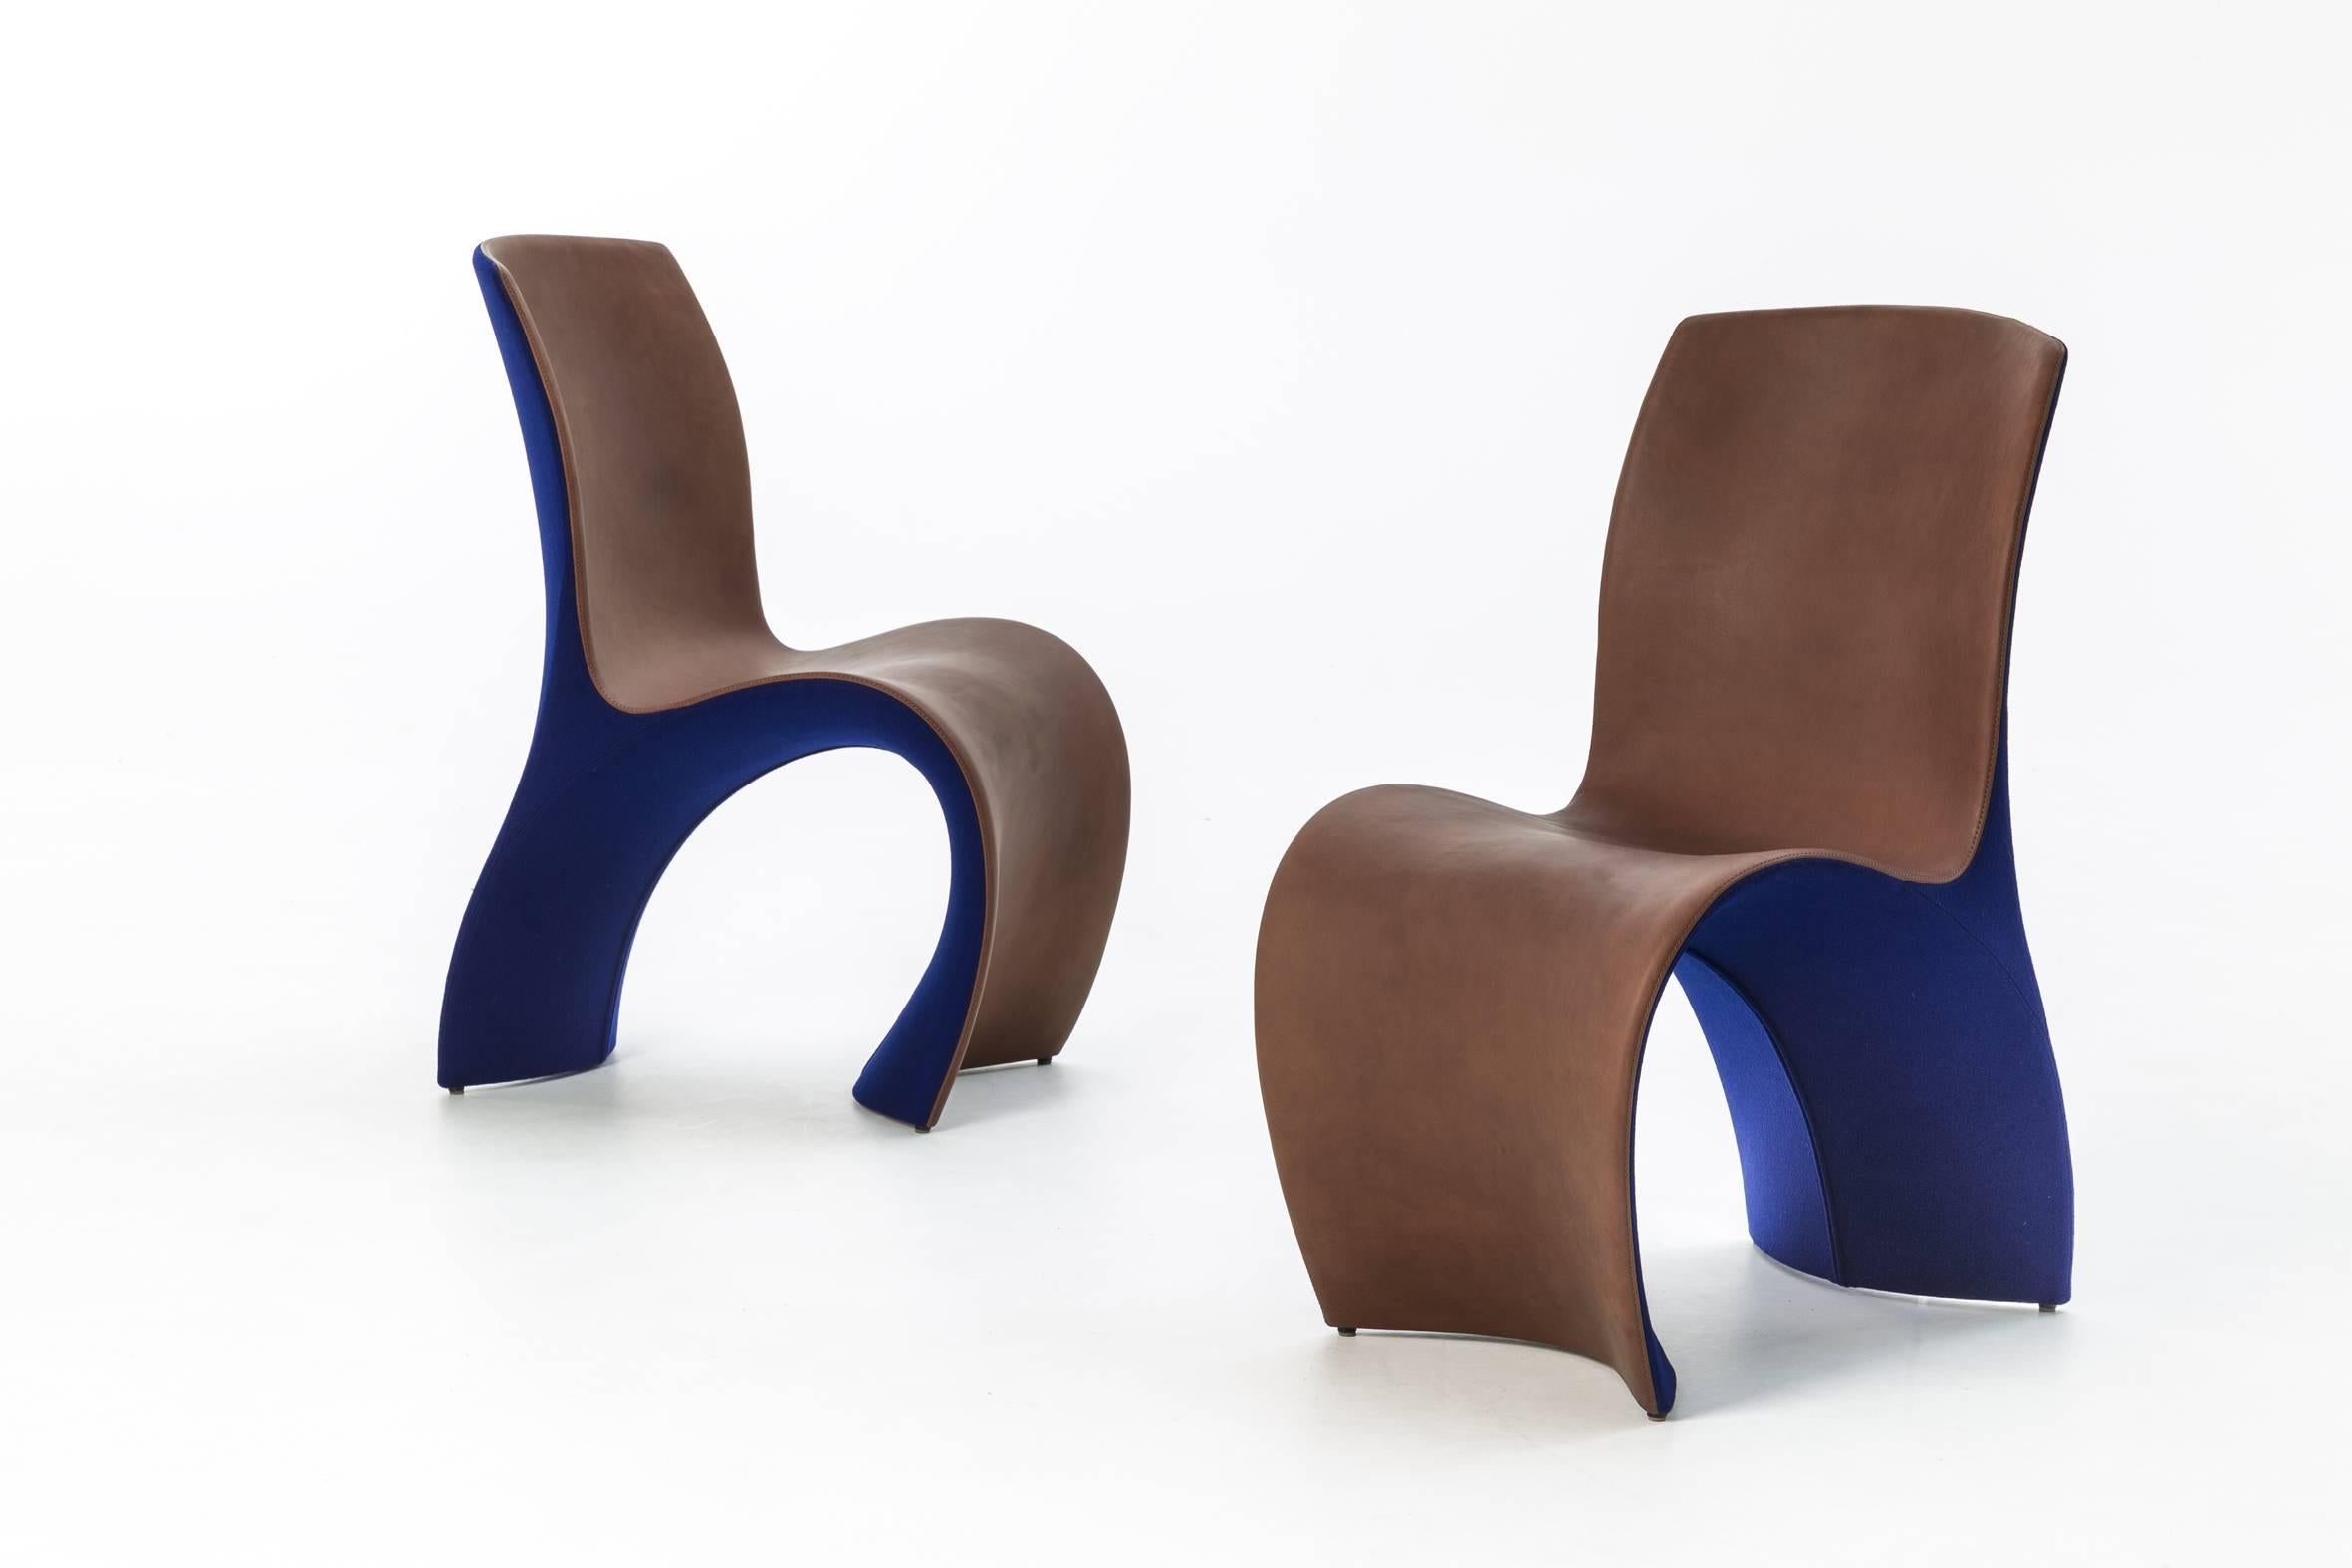 3 Skin Soft chair by Ron Arad upholstered in fabric or leather for Moroso. 

Moroso 3 Skin Soft by Ron Arad. 

The re-introduction of the three Skin chair by Ron Arad, this time in an upholstered version. The curved architectural lines are now